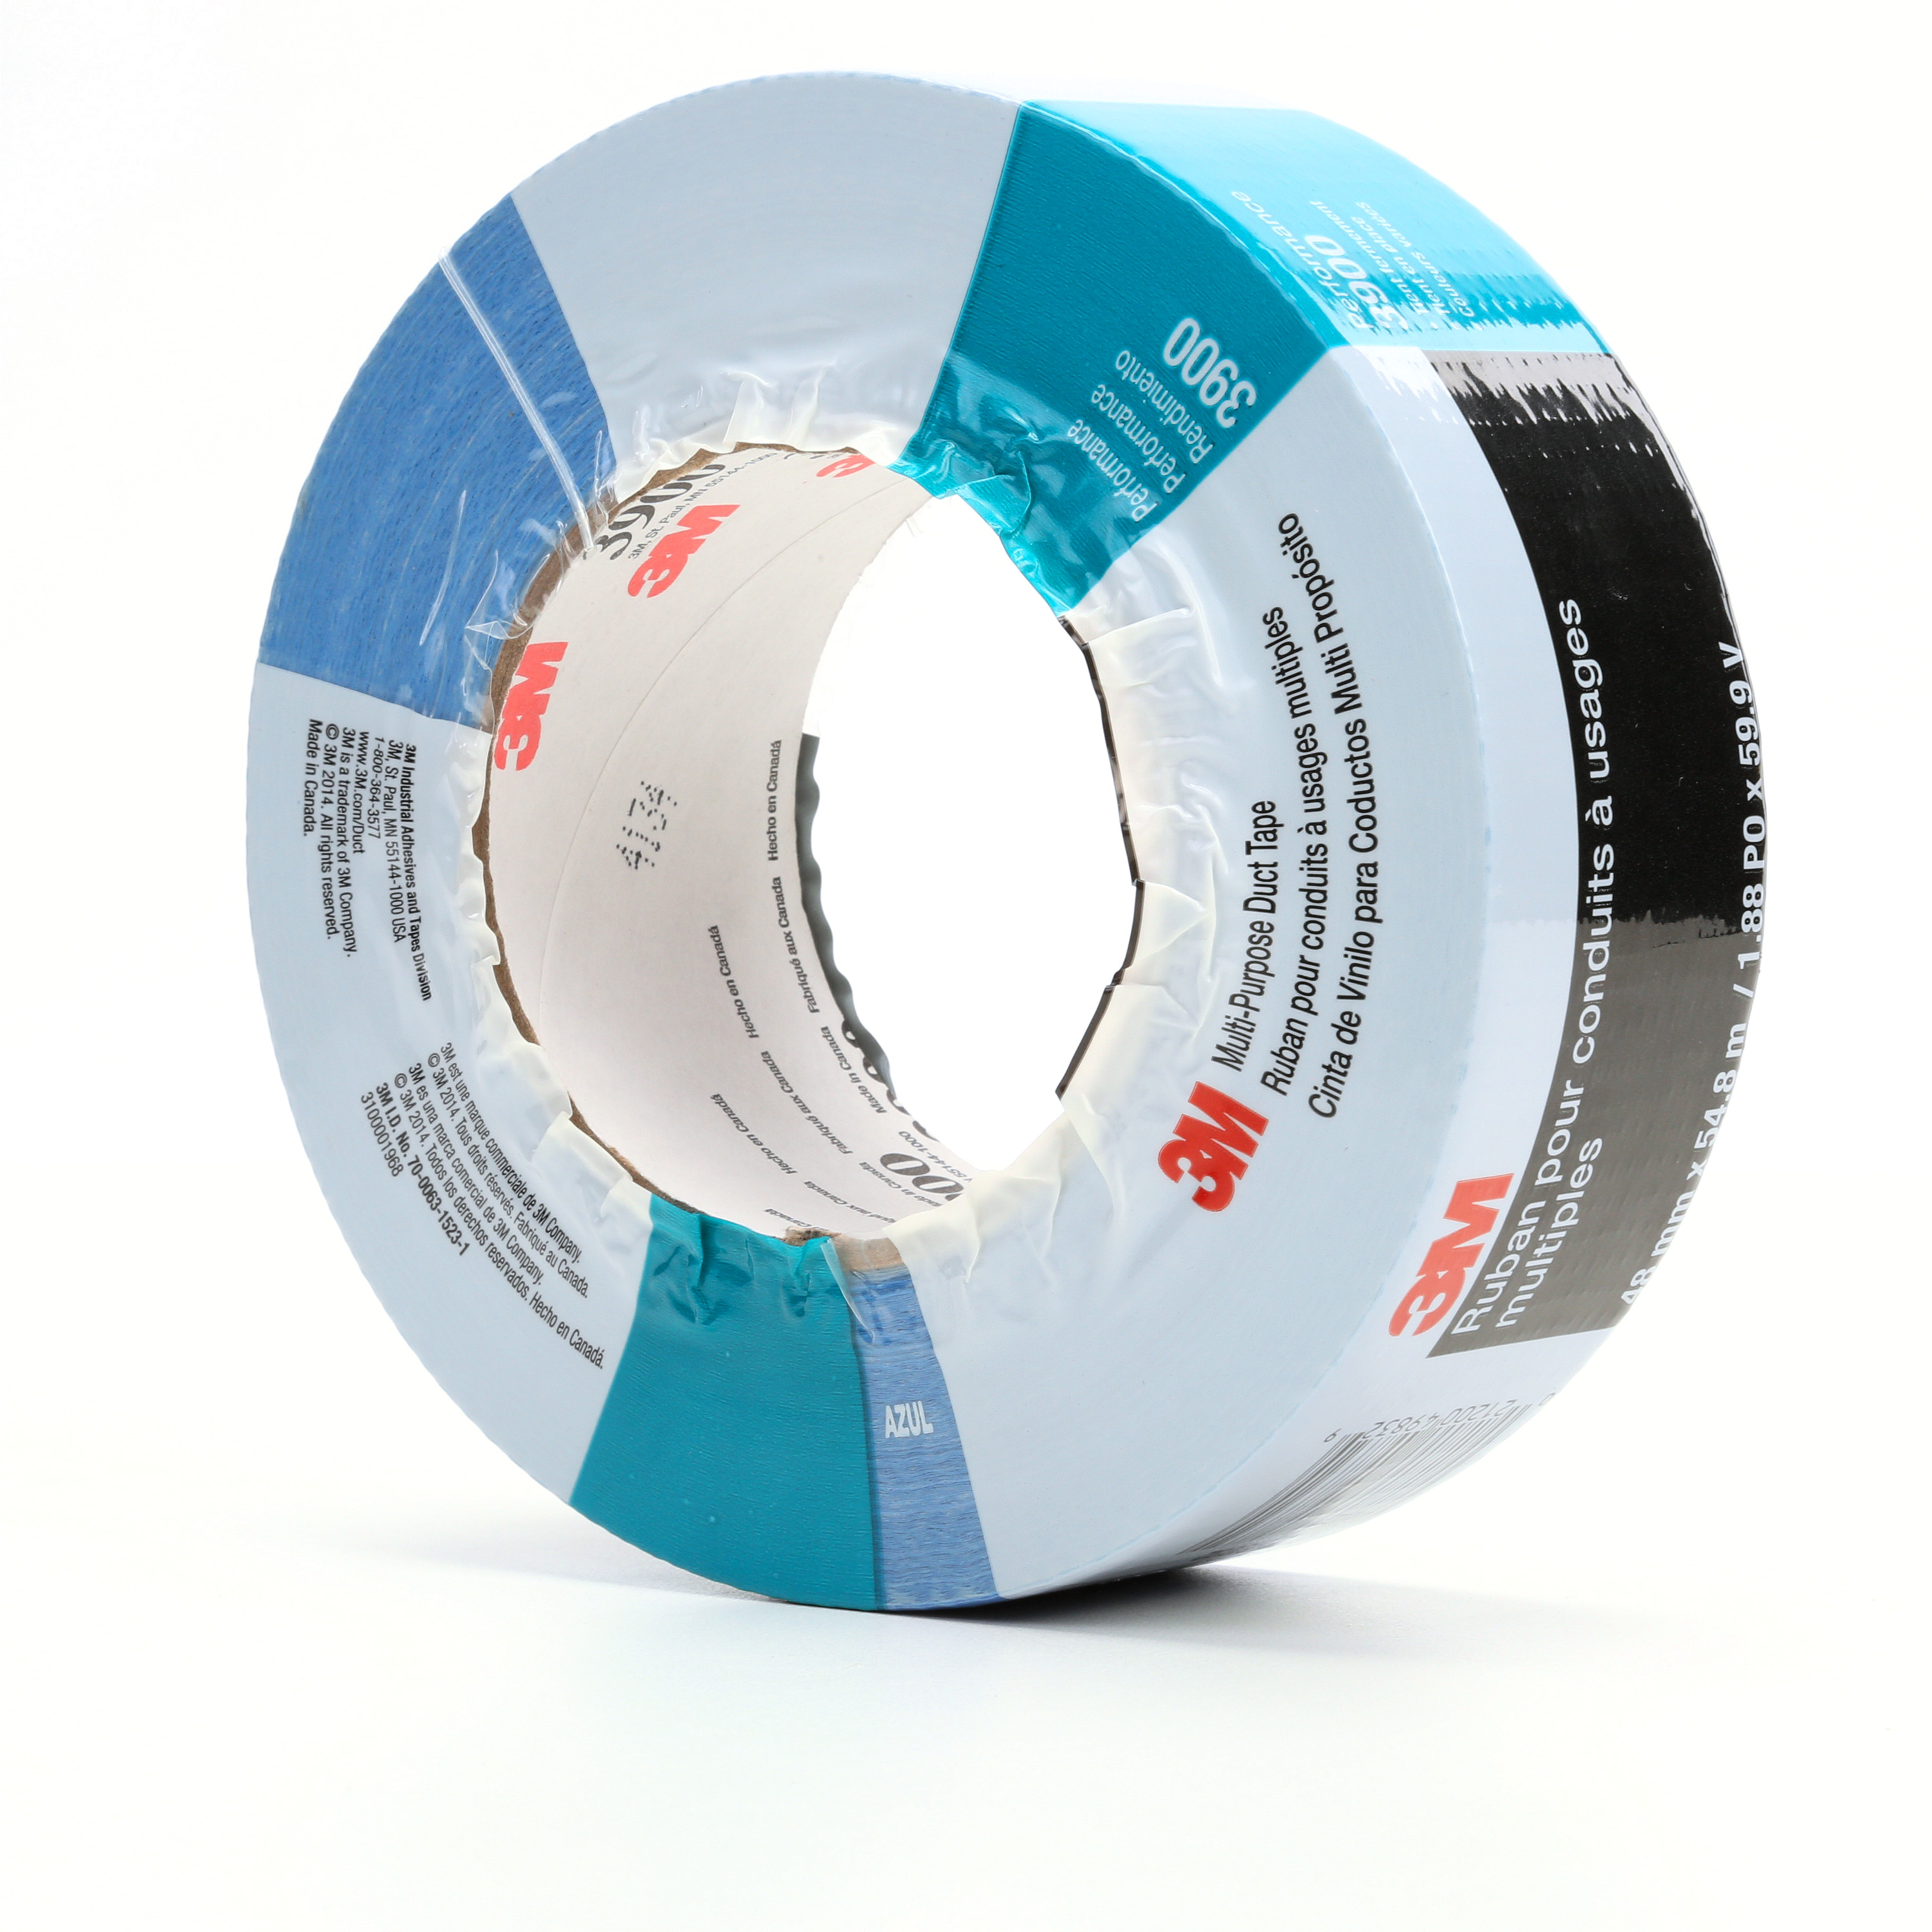 3M™ Multi-Purpose Duct Tape 3900, Blue, 48 mm x 54.8 m, 7.7 mil, 24 per
case, Individually Wrapped Conveniently Packaged